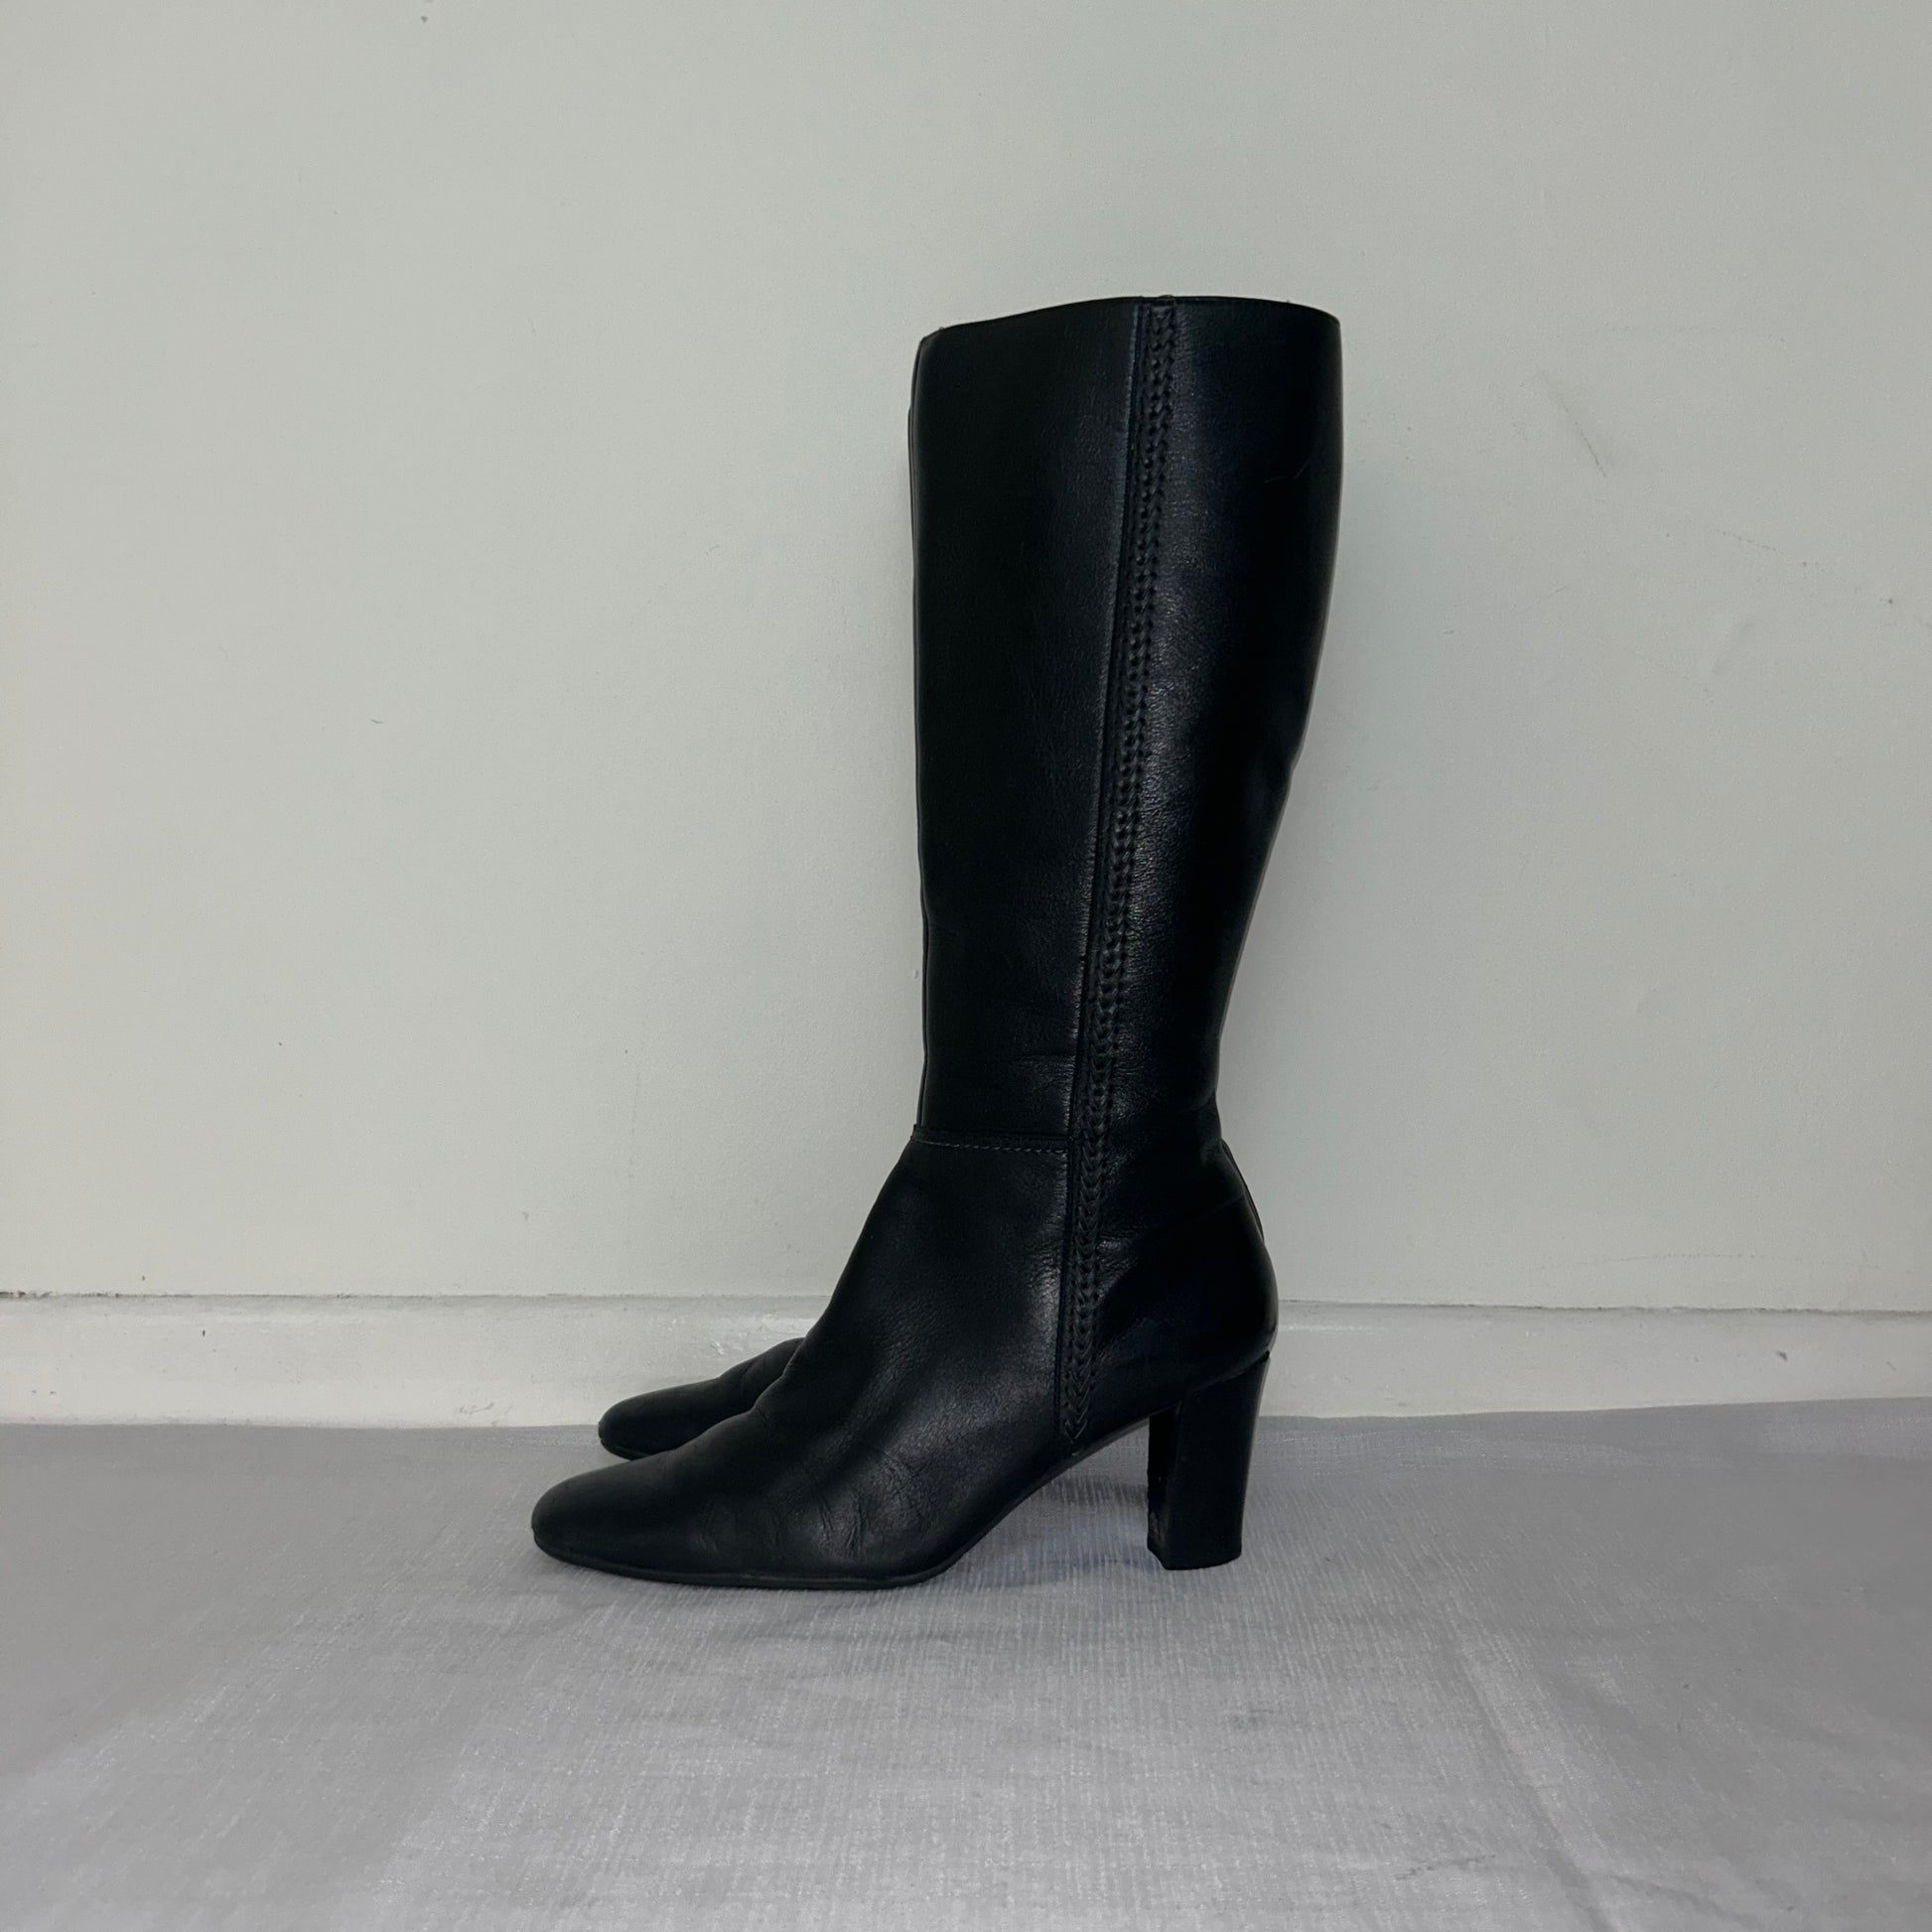 black knee high real leather boots shown on a white background